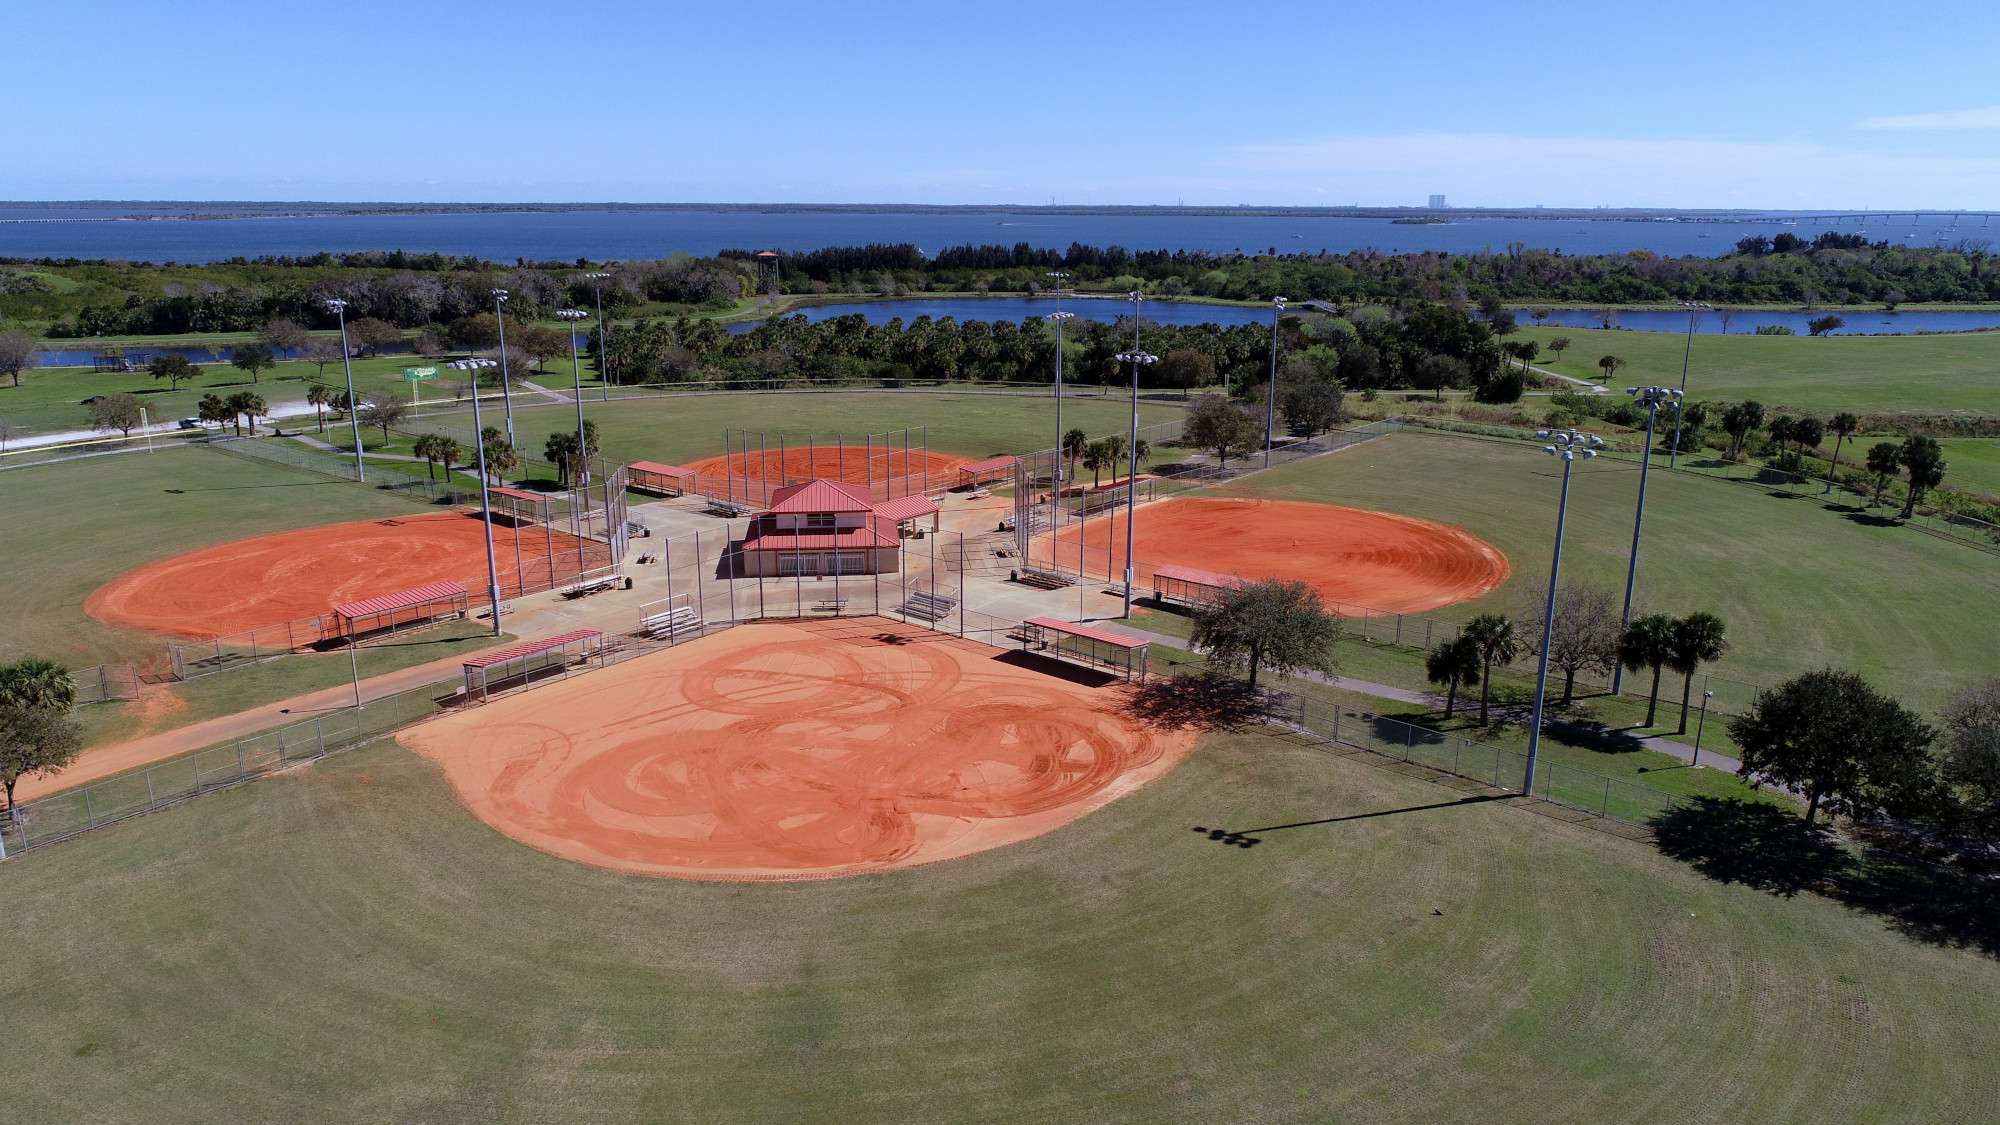 Drone shot of Chain of Lakes Park's Softball fields